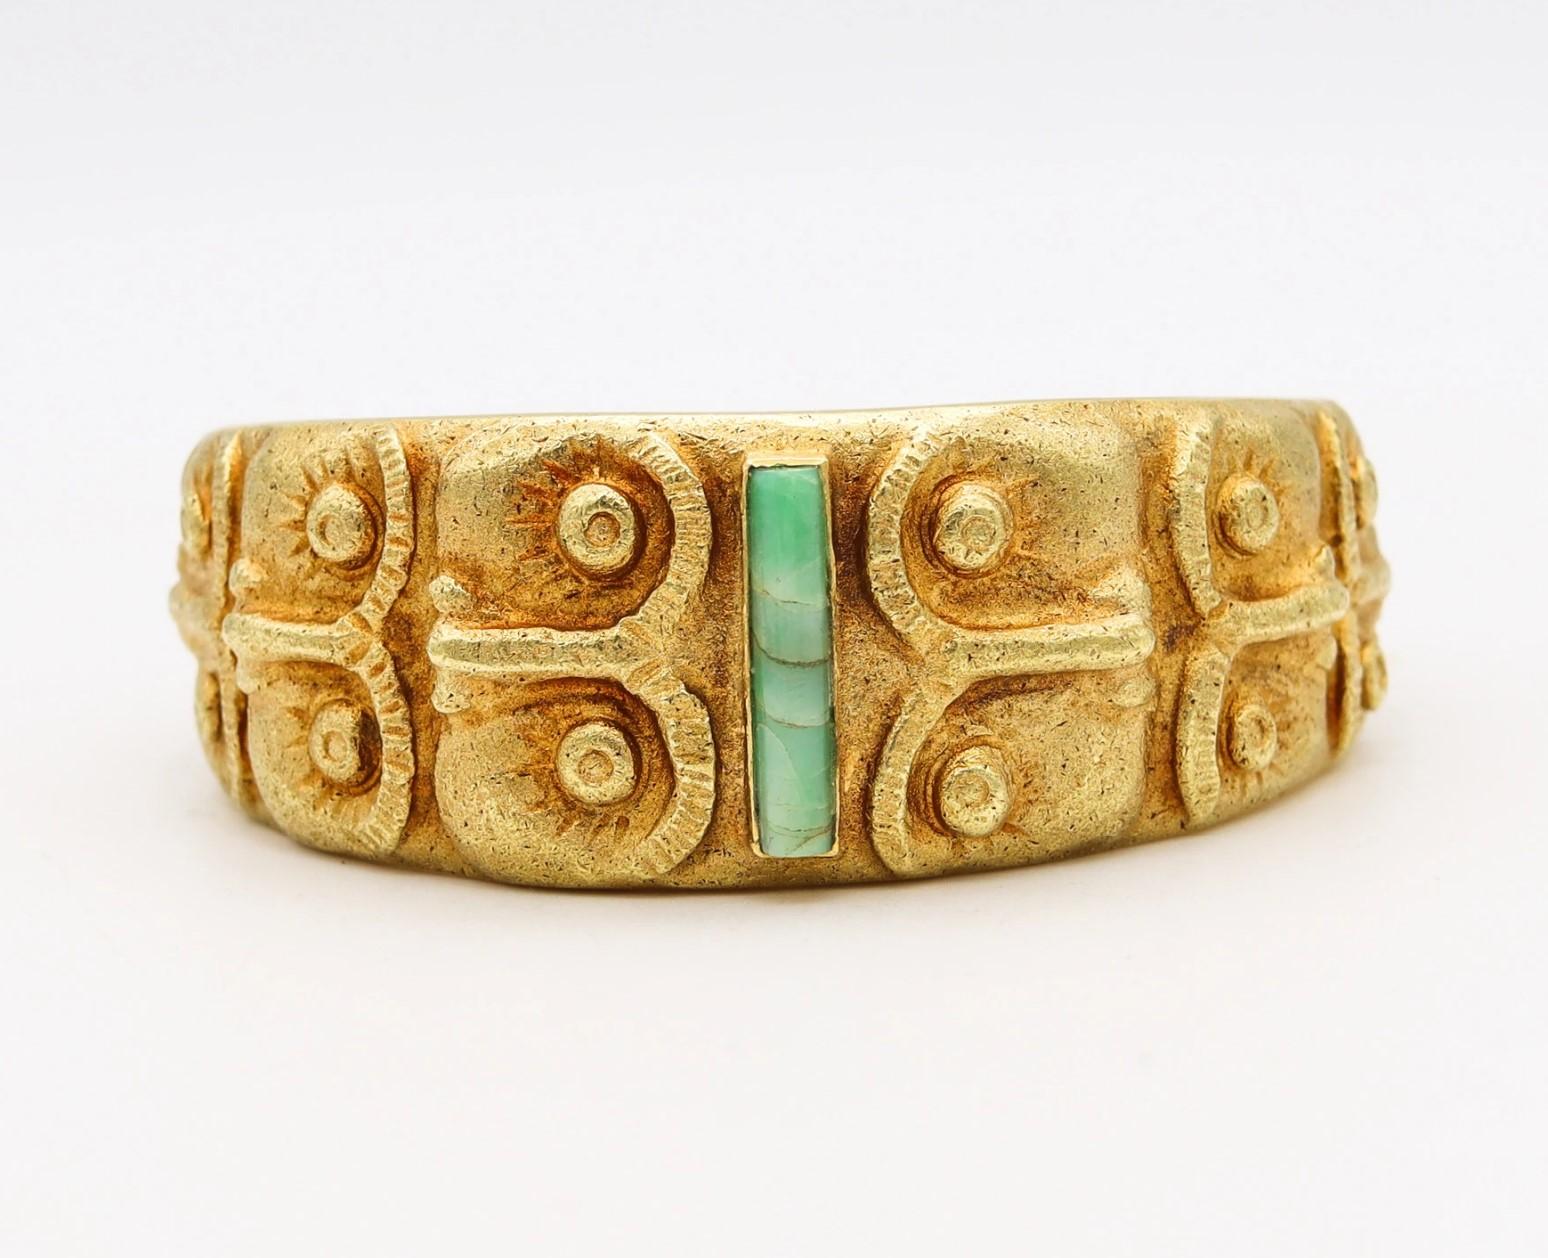 Sculptural cuff-bracelet designed by Olga Finzi for Arrigo Finzi Arte.

Gorgeous statement piece of jewelry created in Milan Italy during the mid century period, circa early 1960's. This one-of-a-kind bracelet was designed by Olga Finzi for Arrigo